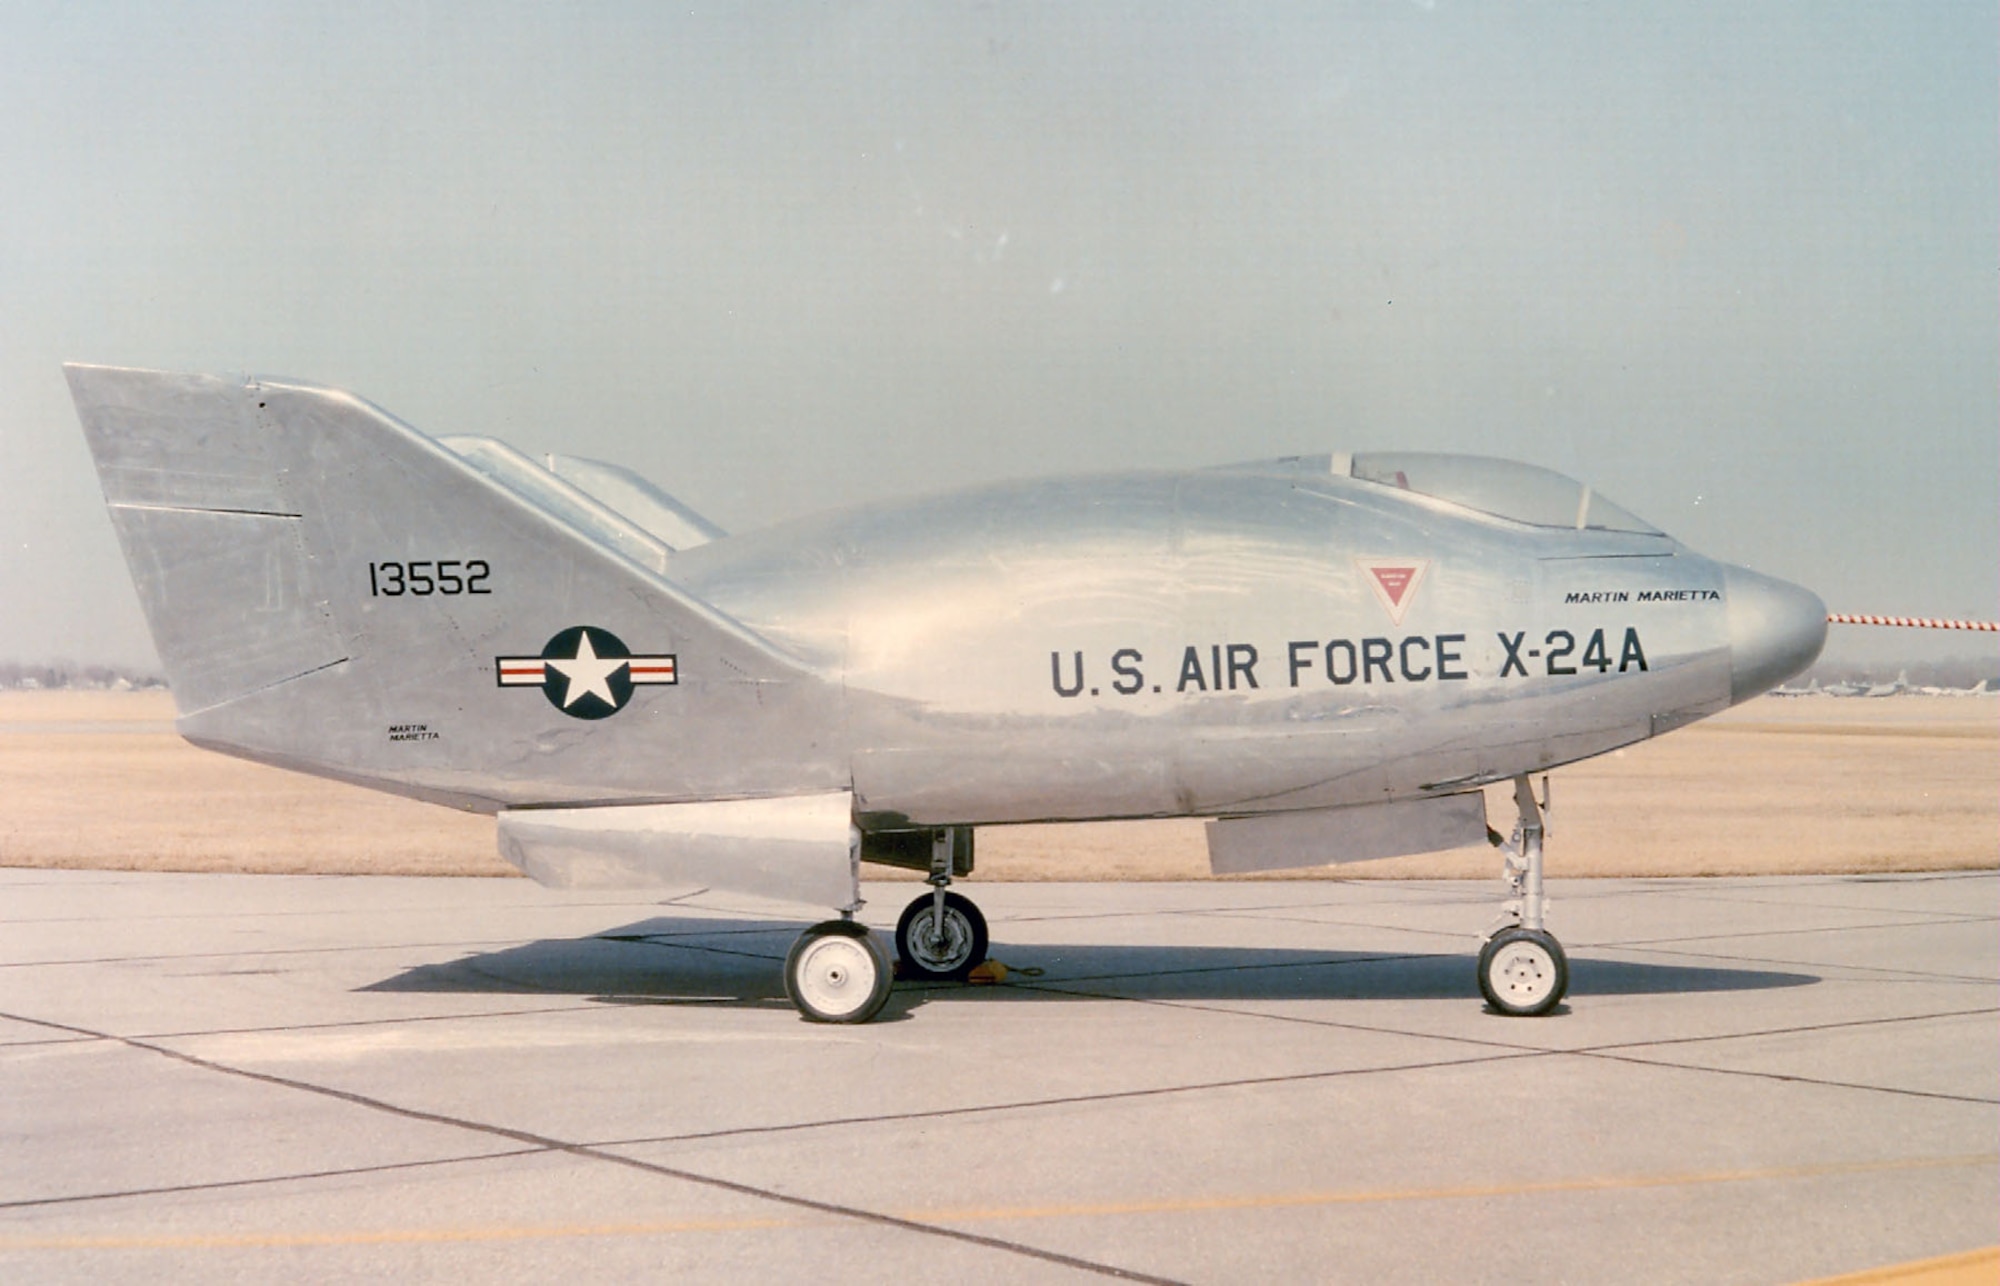 DAYTON, Ohio -- Martin X-24A at the National Museum of the United States Air Force. (U.S. Air Force photo)